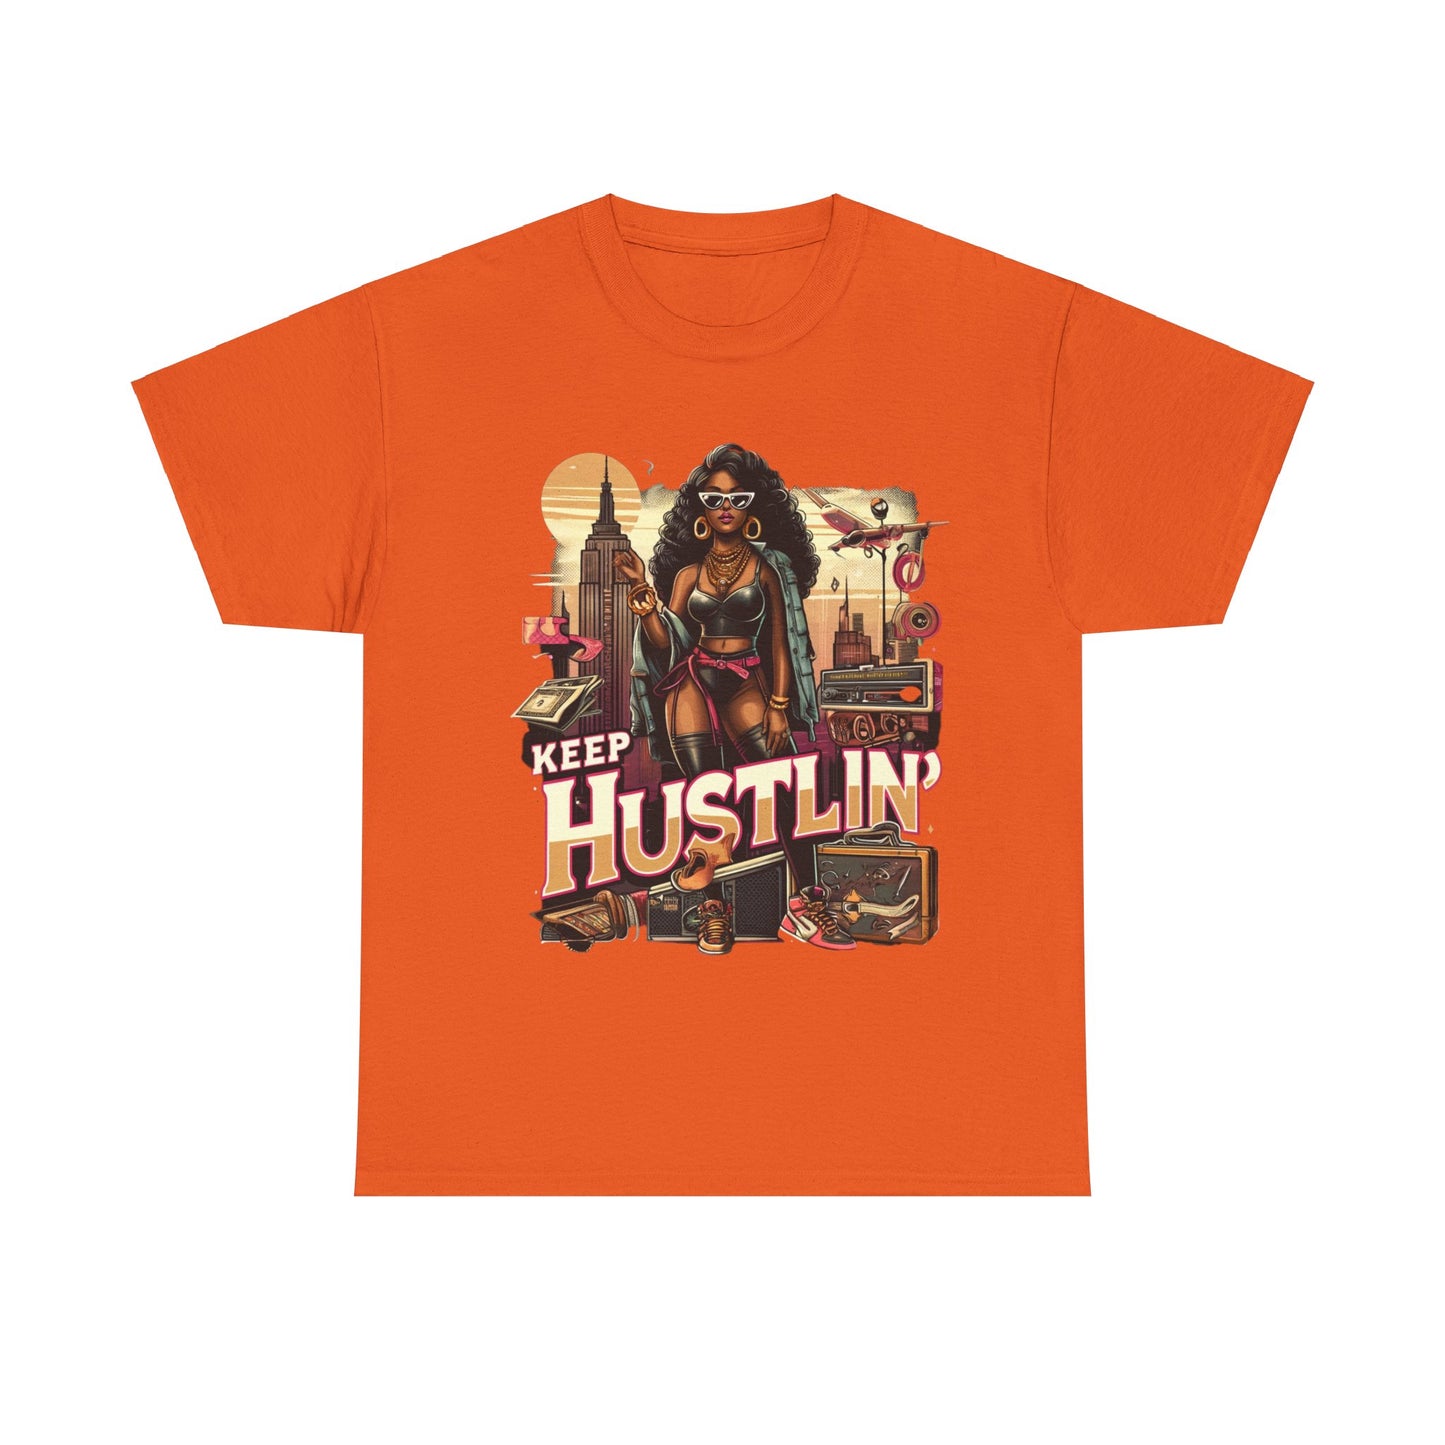 "Keep Hustlin' Tee - Unleash Your Inner Power & Confidence" | Empowering Pin-Up Style Streetwear